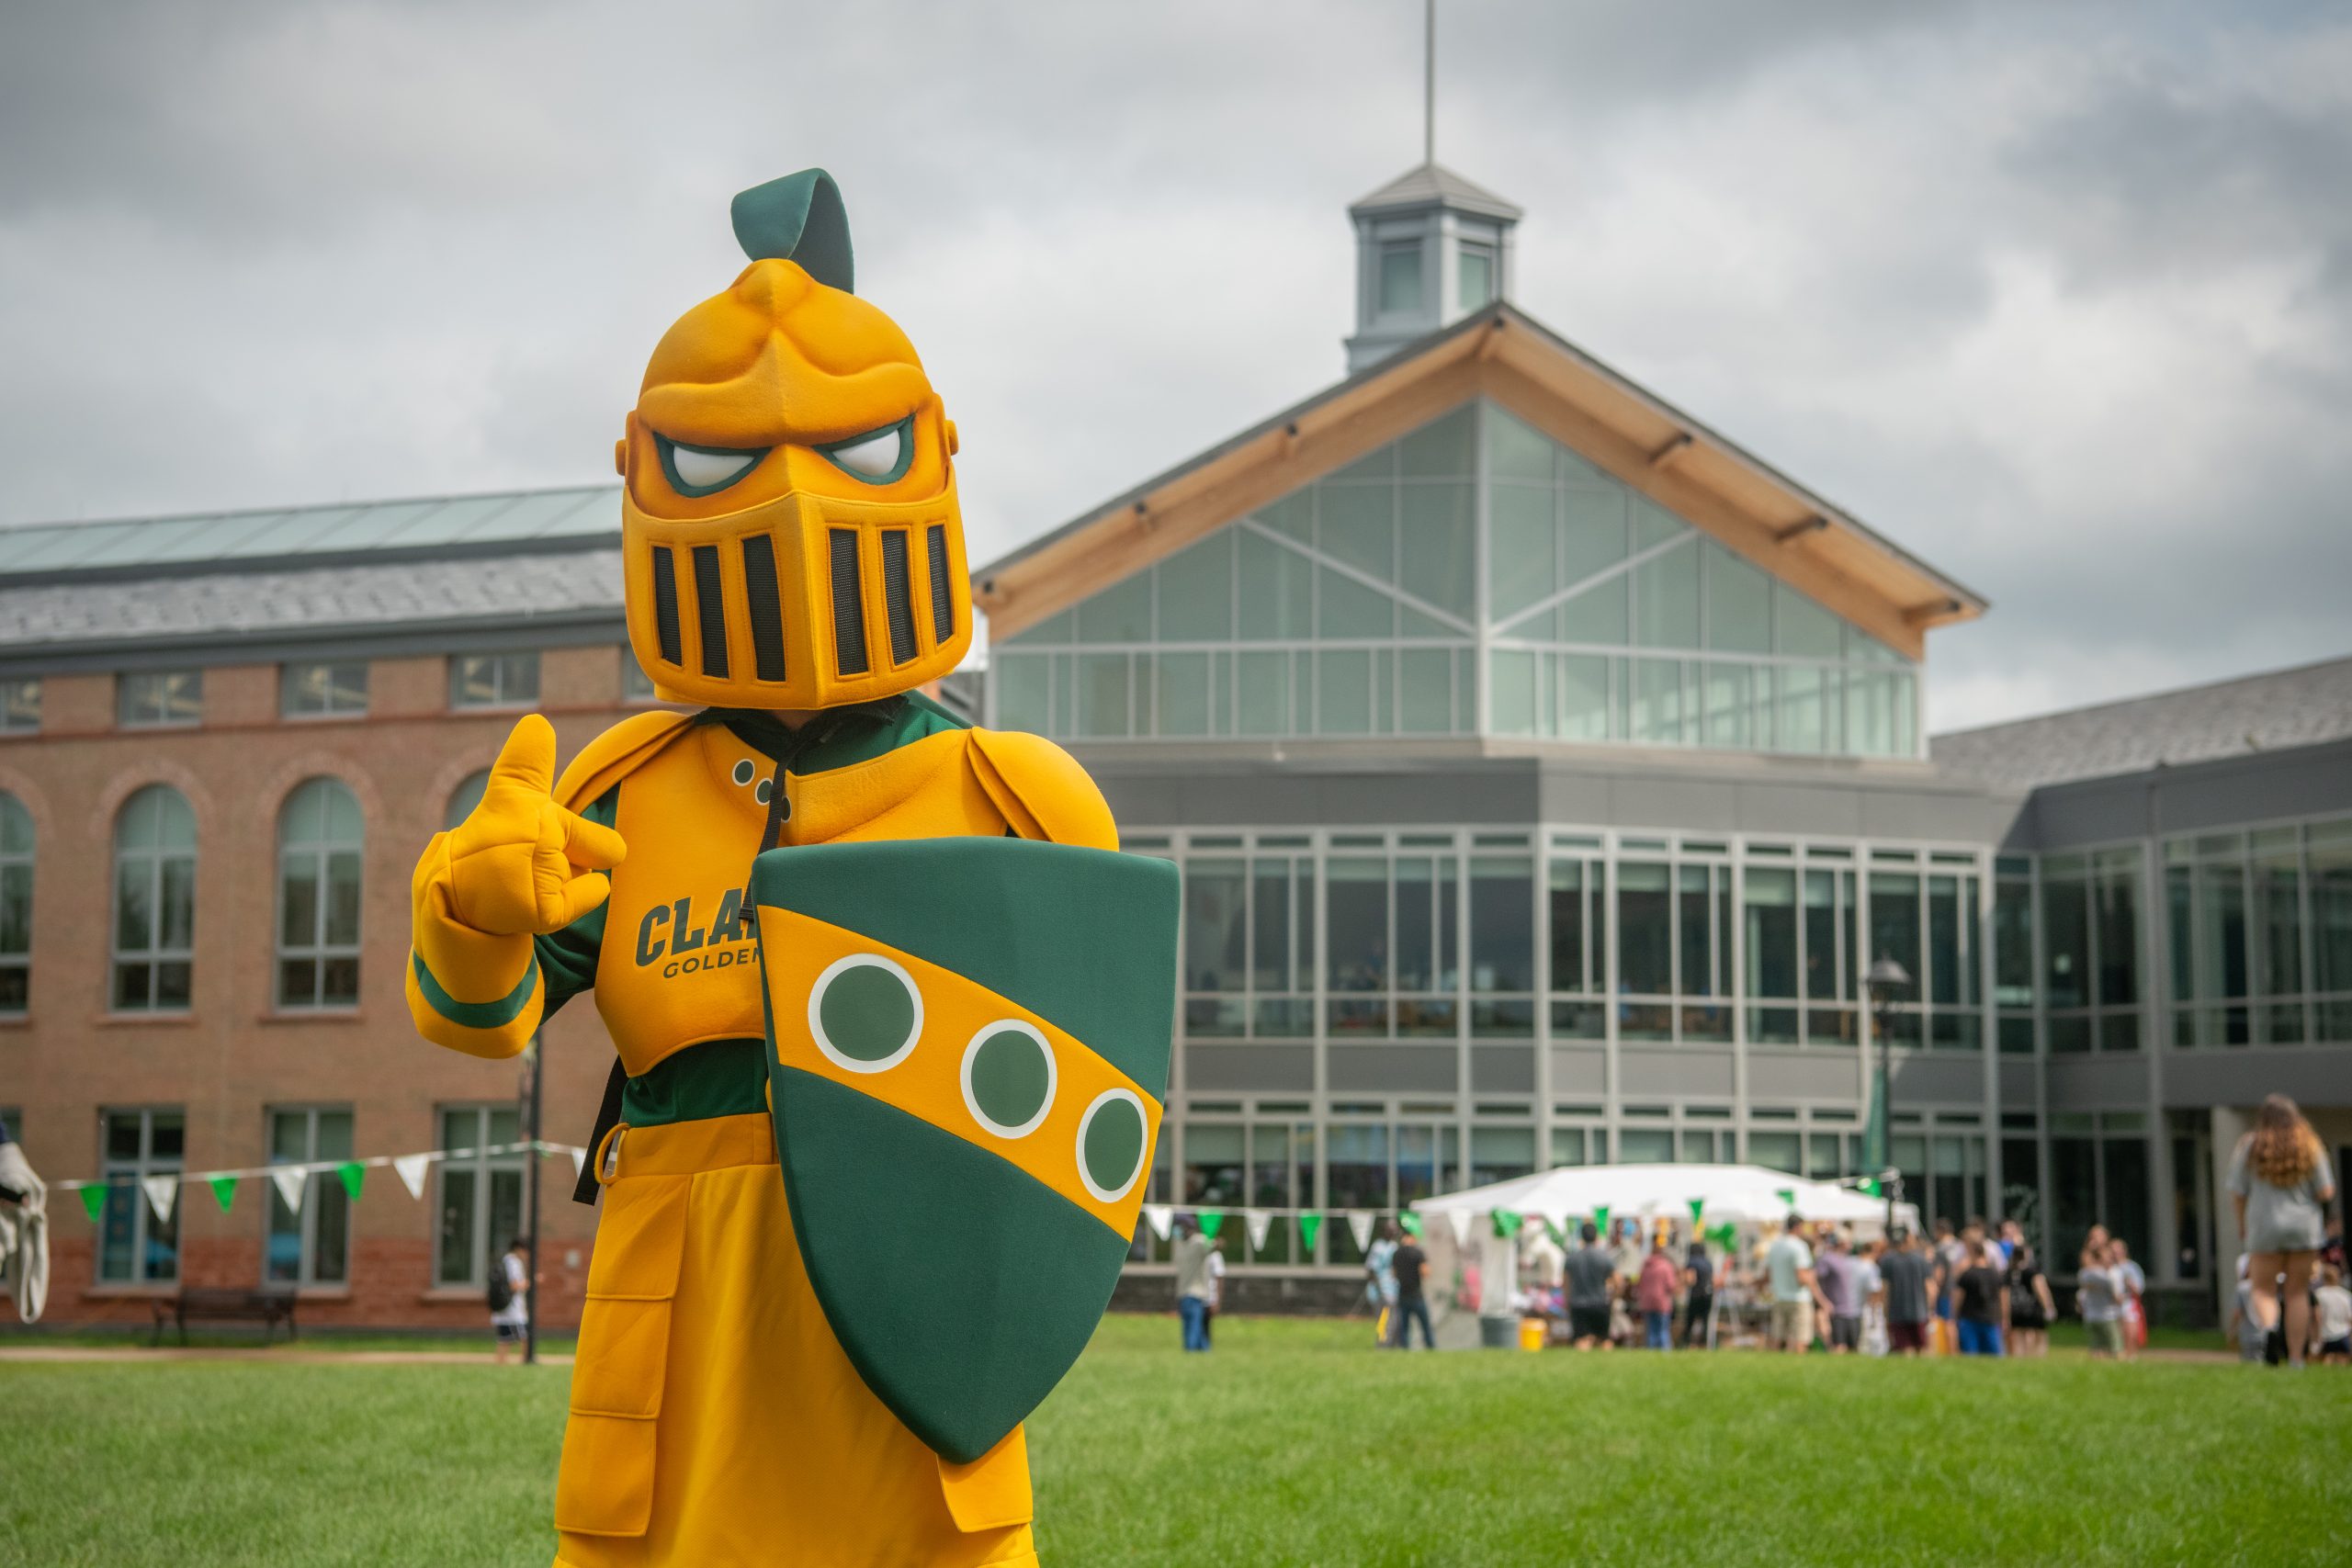 The Golden Knight with a thumbs up standing on cheel lawn with the student center in the background